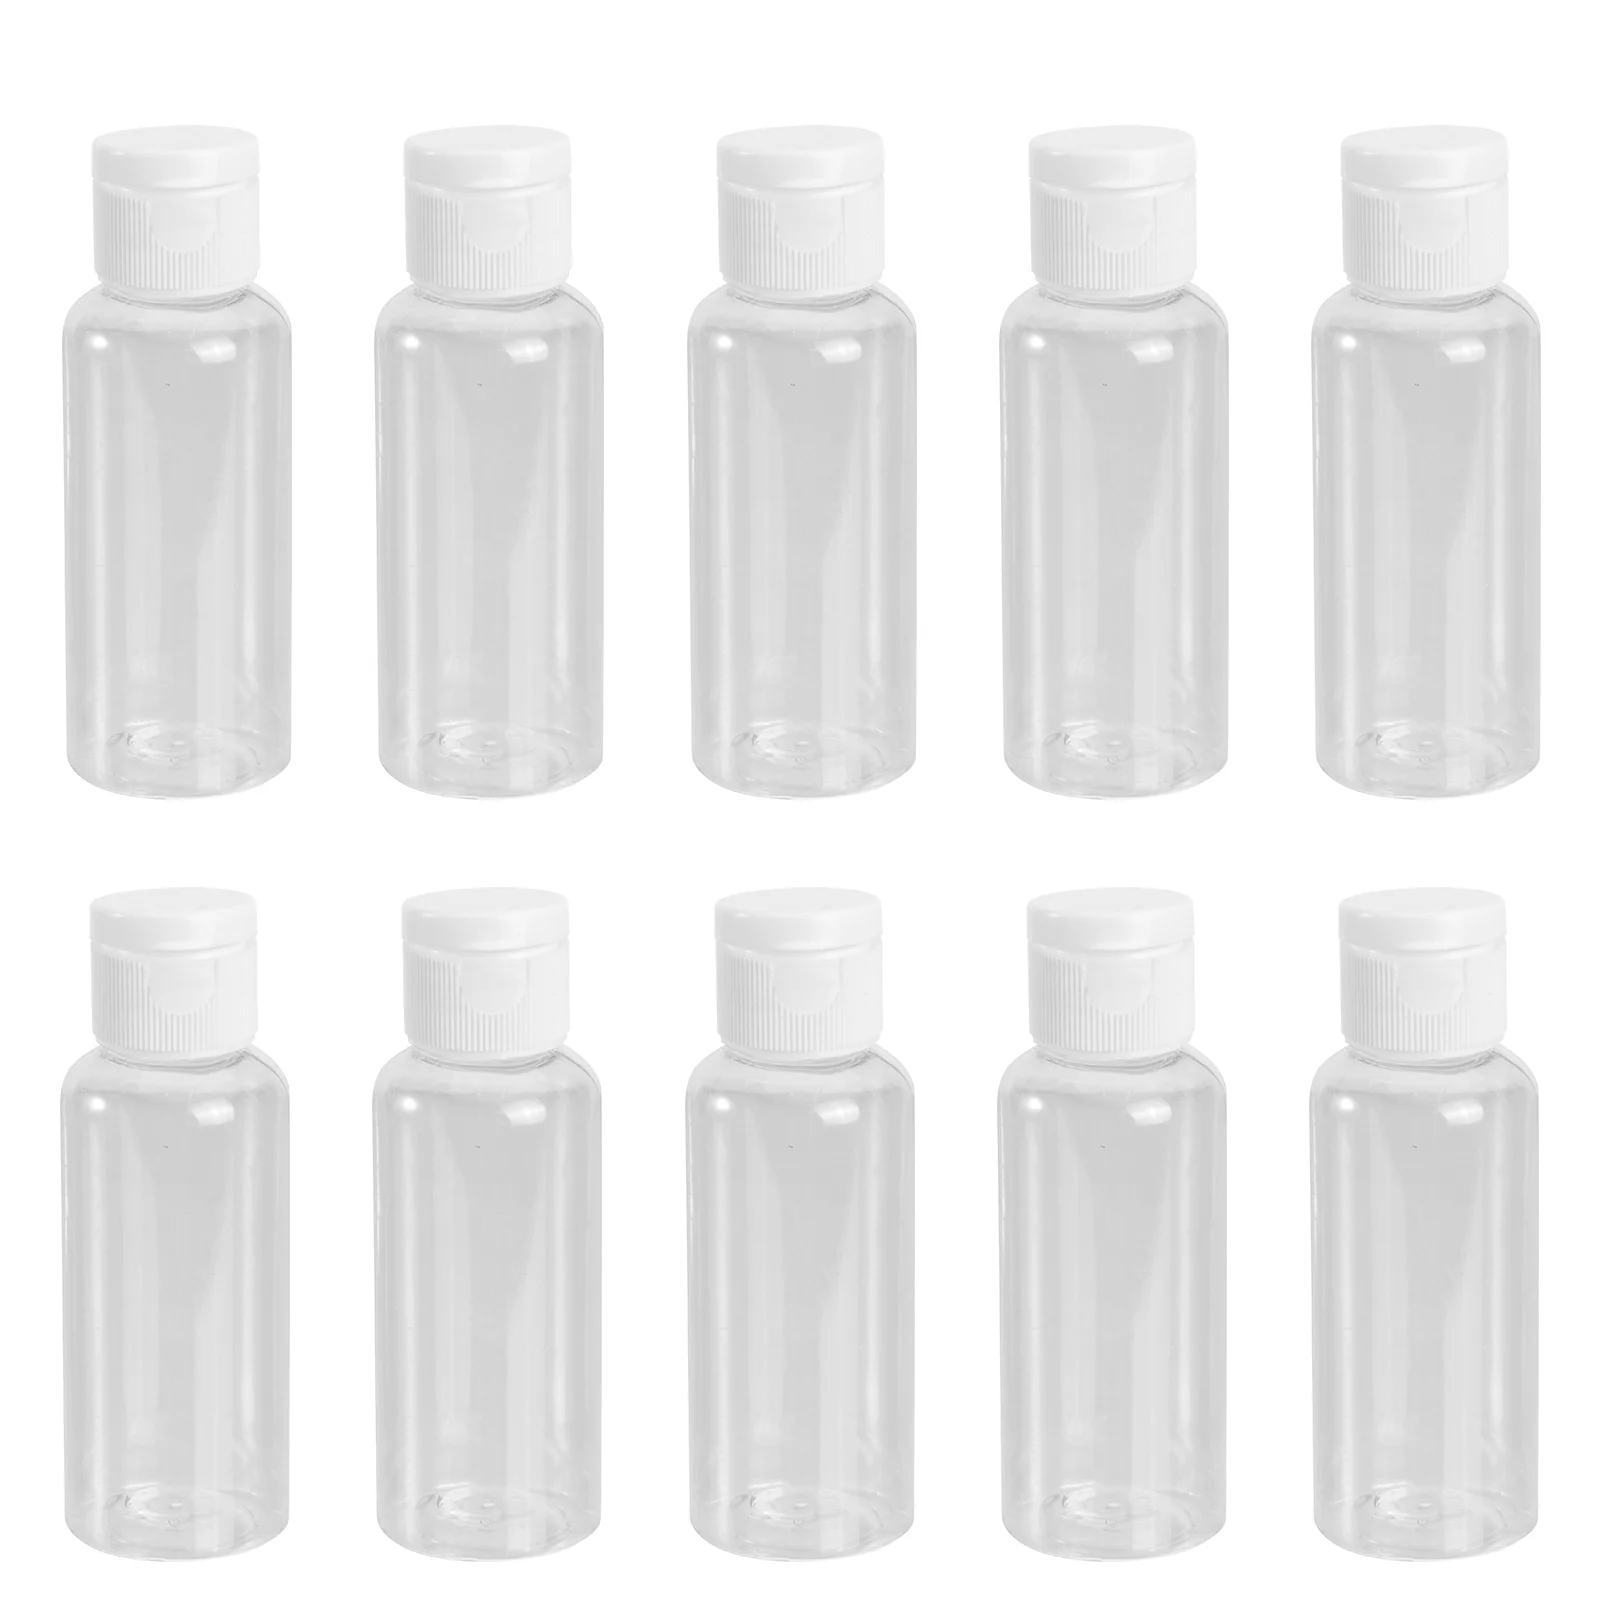 

Bottles Travel Bottle Lotion Clear Container Makeup Refillable Jars Vial Body Wash Shampoo Empty Sample Squeeze Liquids